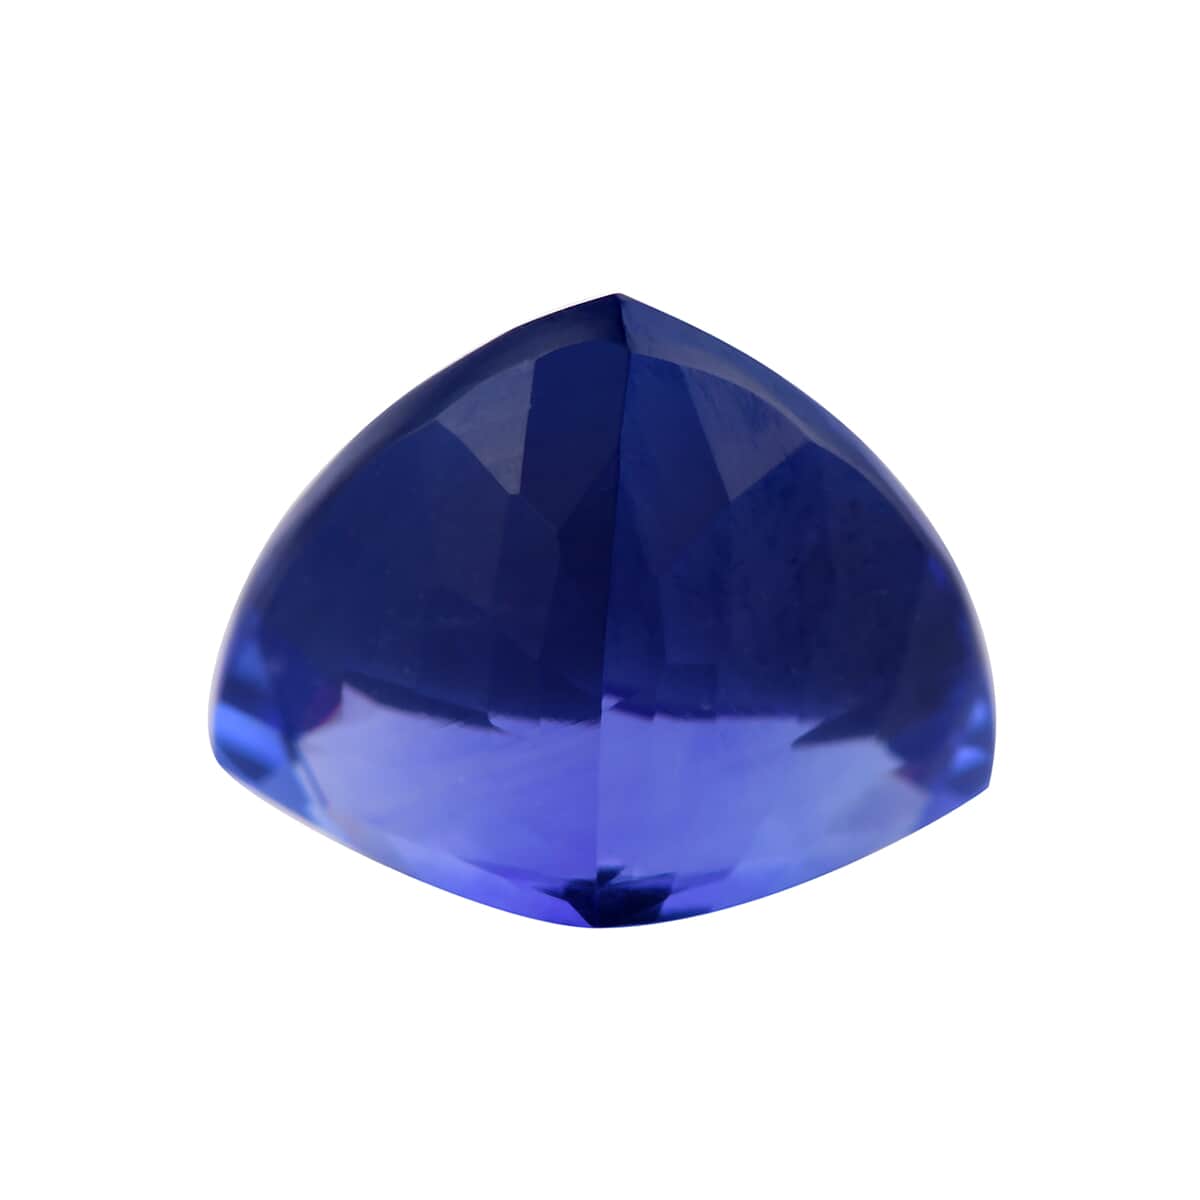 Certified and Appraised AAAA Vivid Tanzanite (Trl Free Size) 5.00 ctw, Loose Gemstone For Jewelry Making, Trillion Free Size Tanzanite Gem, Tanzanite Stone For Jewelry image number 2